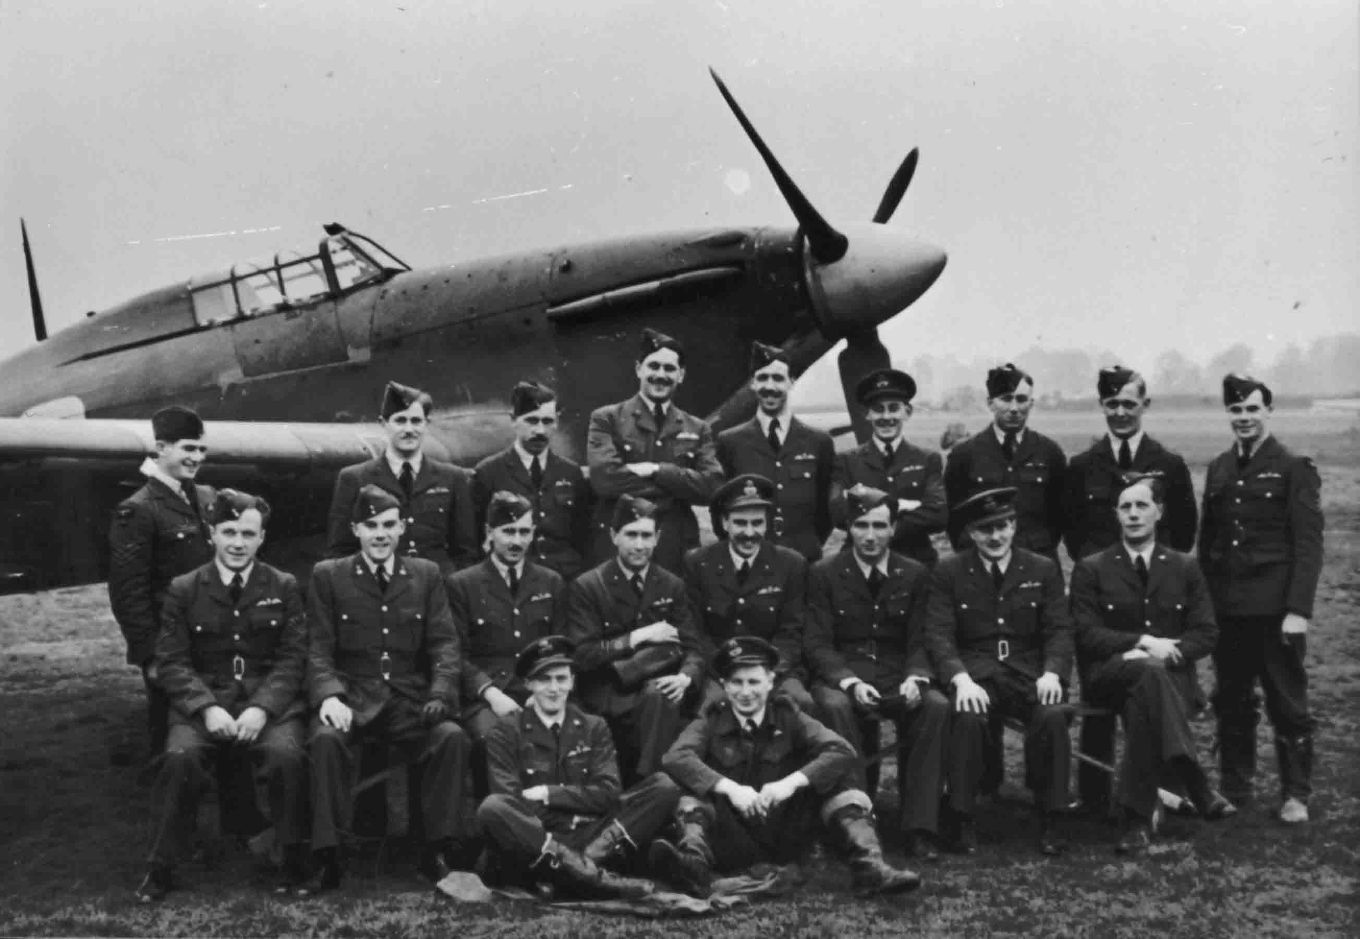 504 Squadron in 1940. Ray Holmes is seated far left in the middle row.